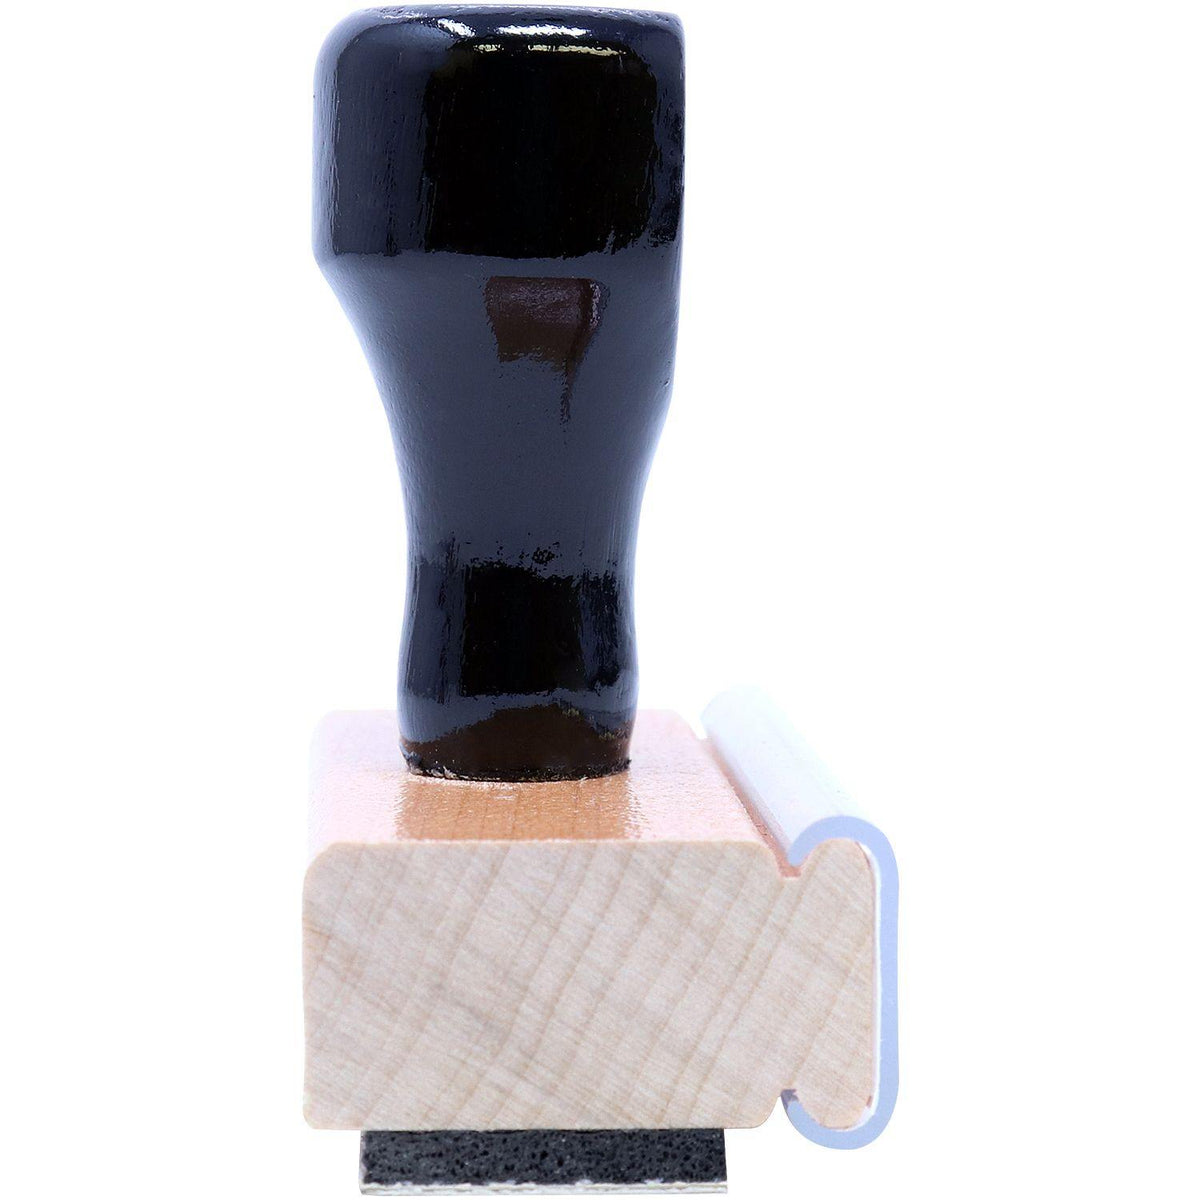 Large Special Funds Rubber Stamp - Engineer Seal Stamps - Brand_Acorn, Impression Size_Large, Stamp Type_Regular Stamp, Type of Use_Business, Type of Use_Finance